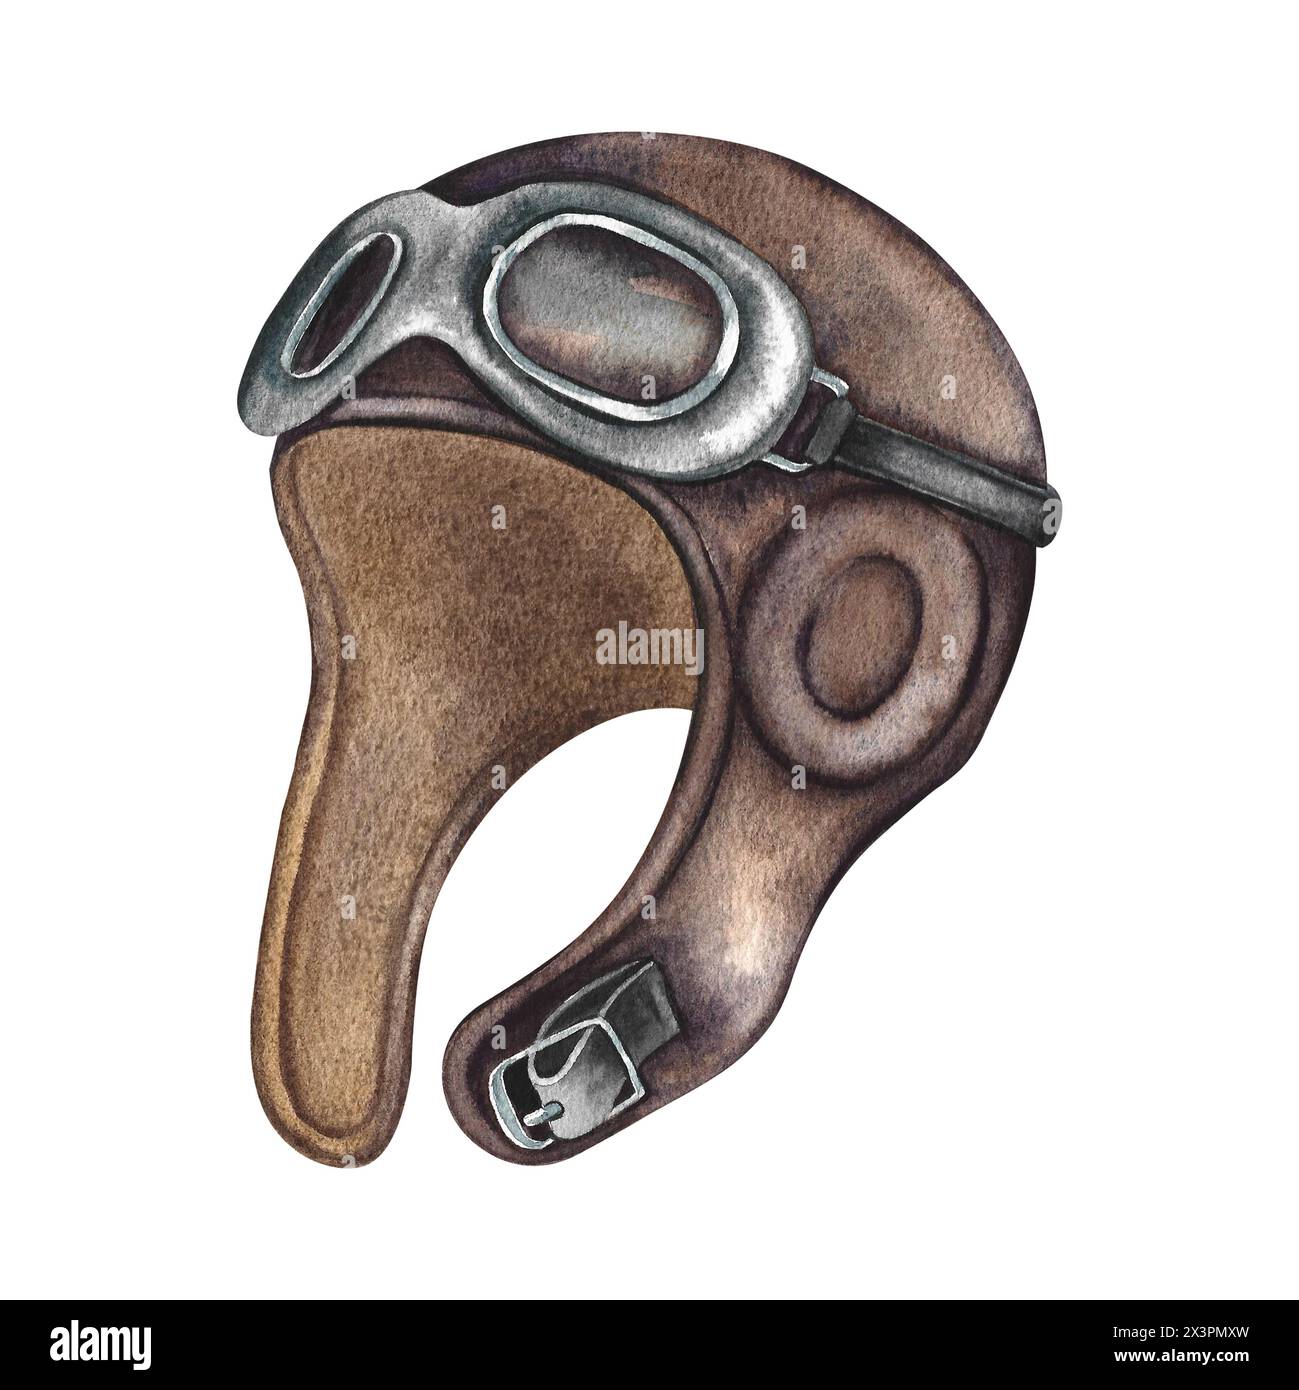 The pilot's helmet. Vintage retro illustration of an antique pilot's protective helmet, made in watercolor by hand. . Isolate it. For banners, flyers, Stock Photo